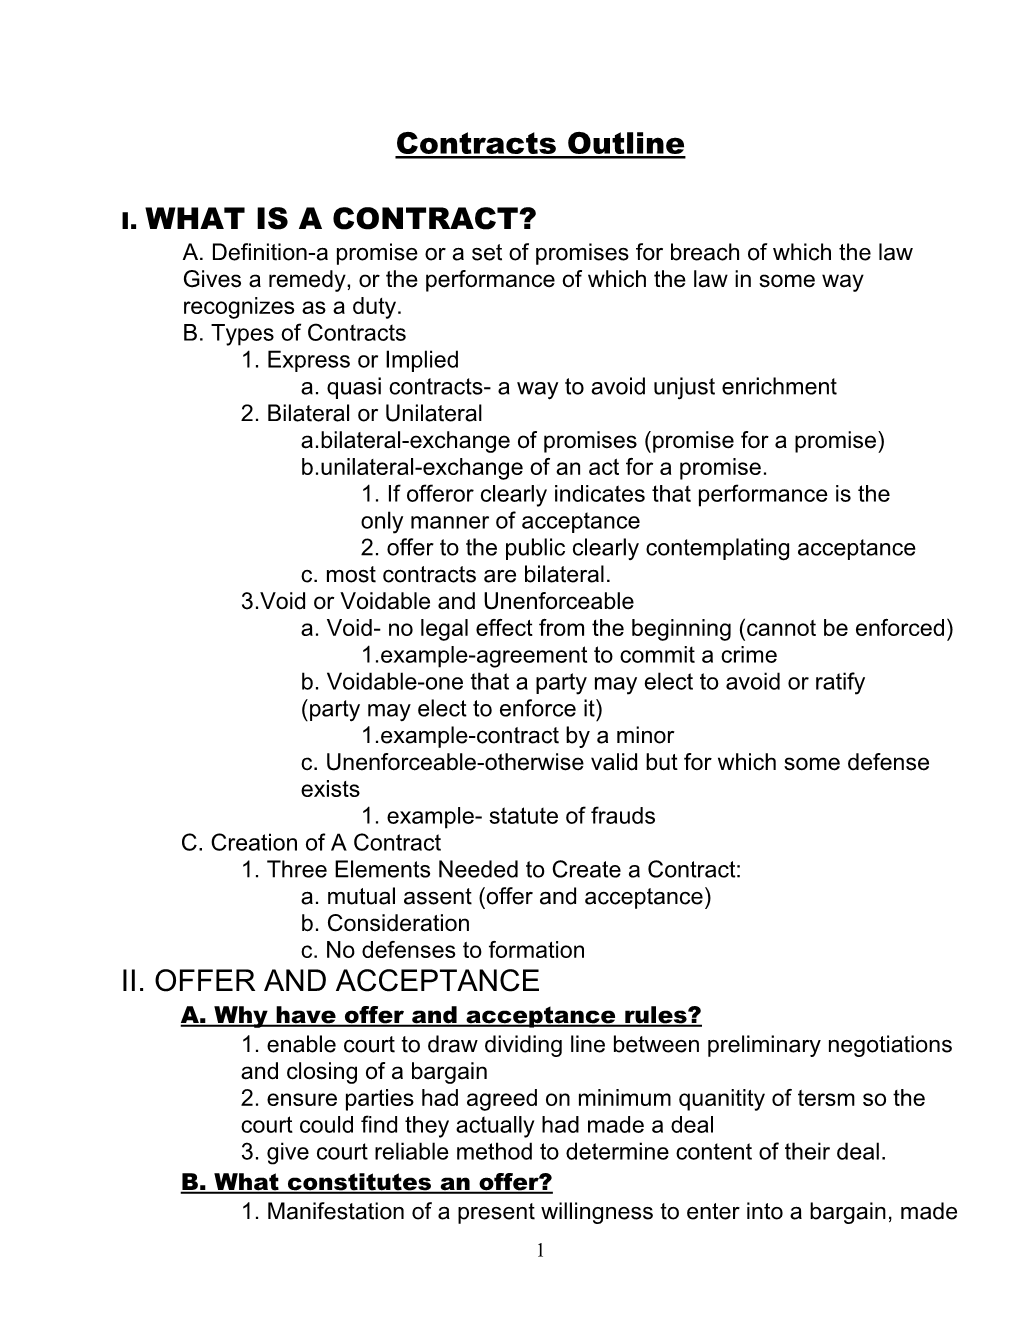 Contracts Outline s1